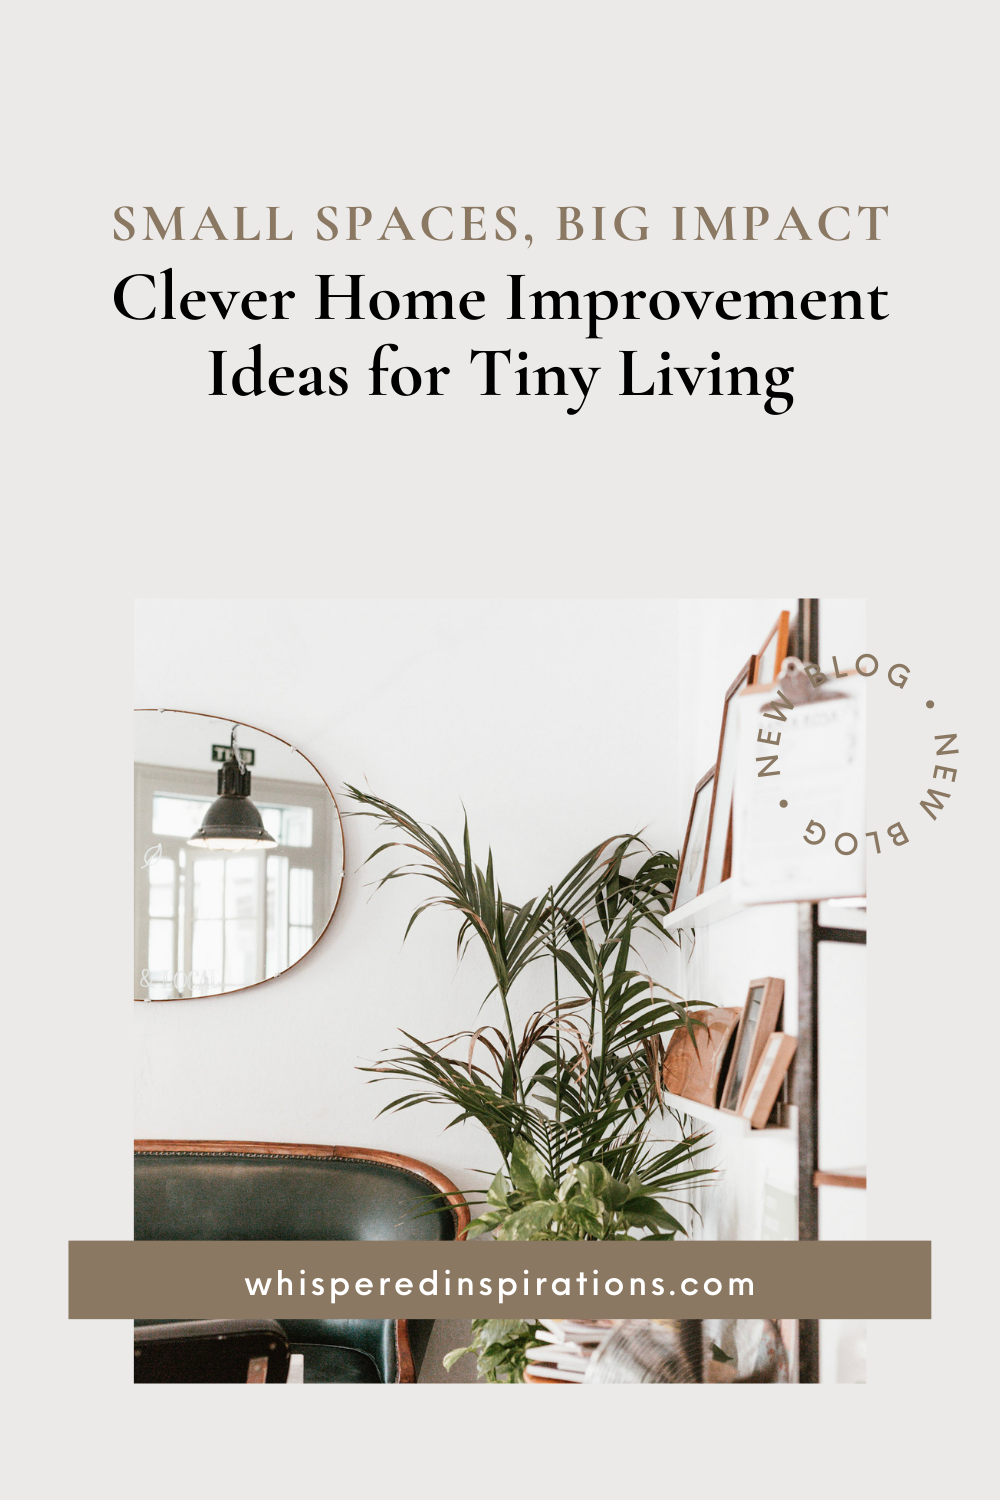 A beautiful living room in a small space. There is a mirror, plants, and lots of space. This article covers home improvement ideas for tiny living.